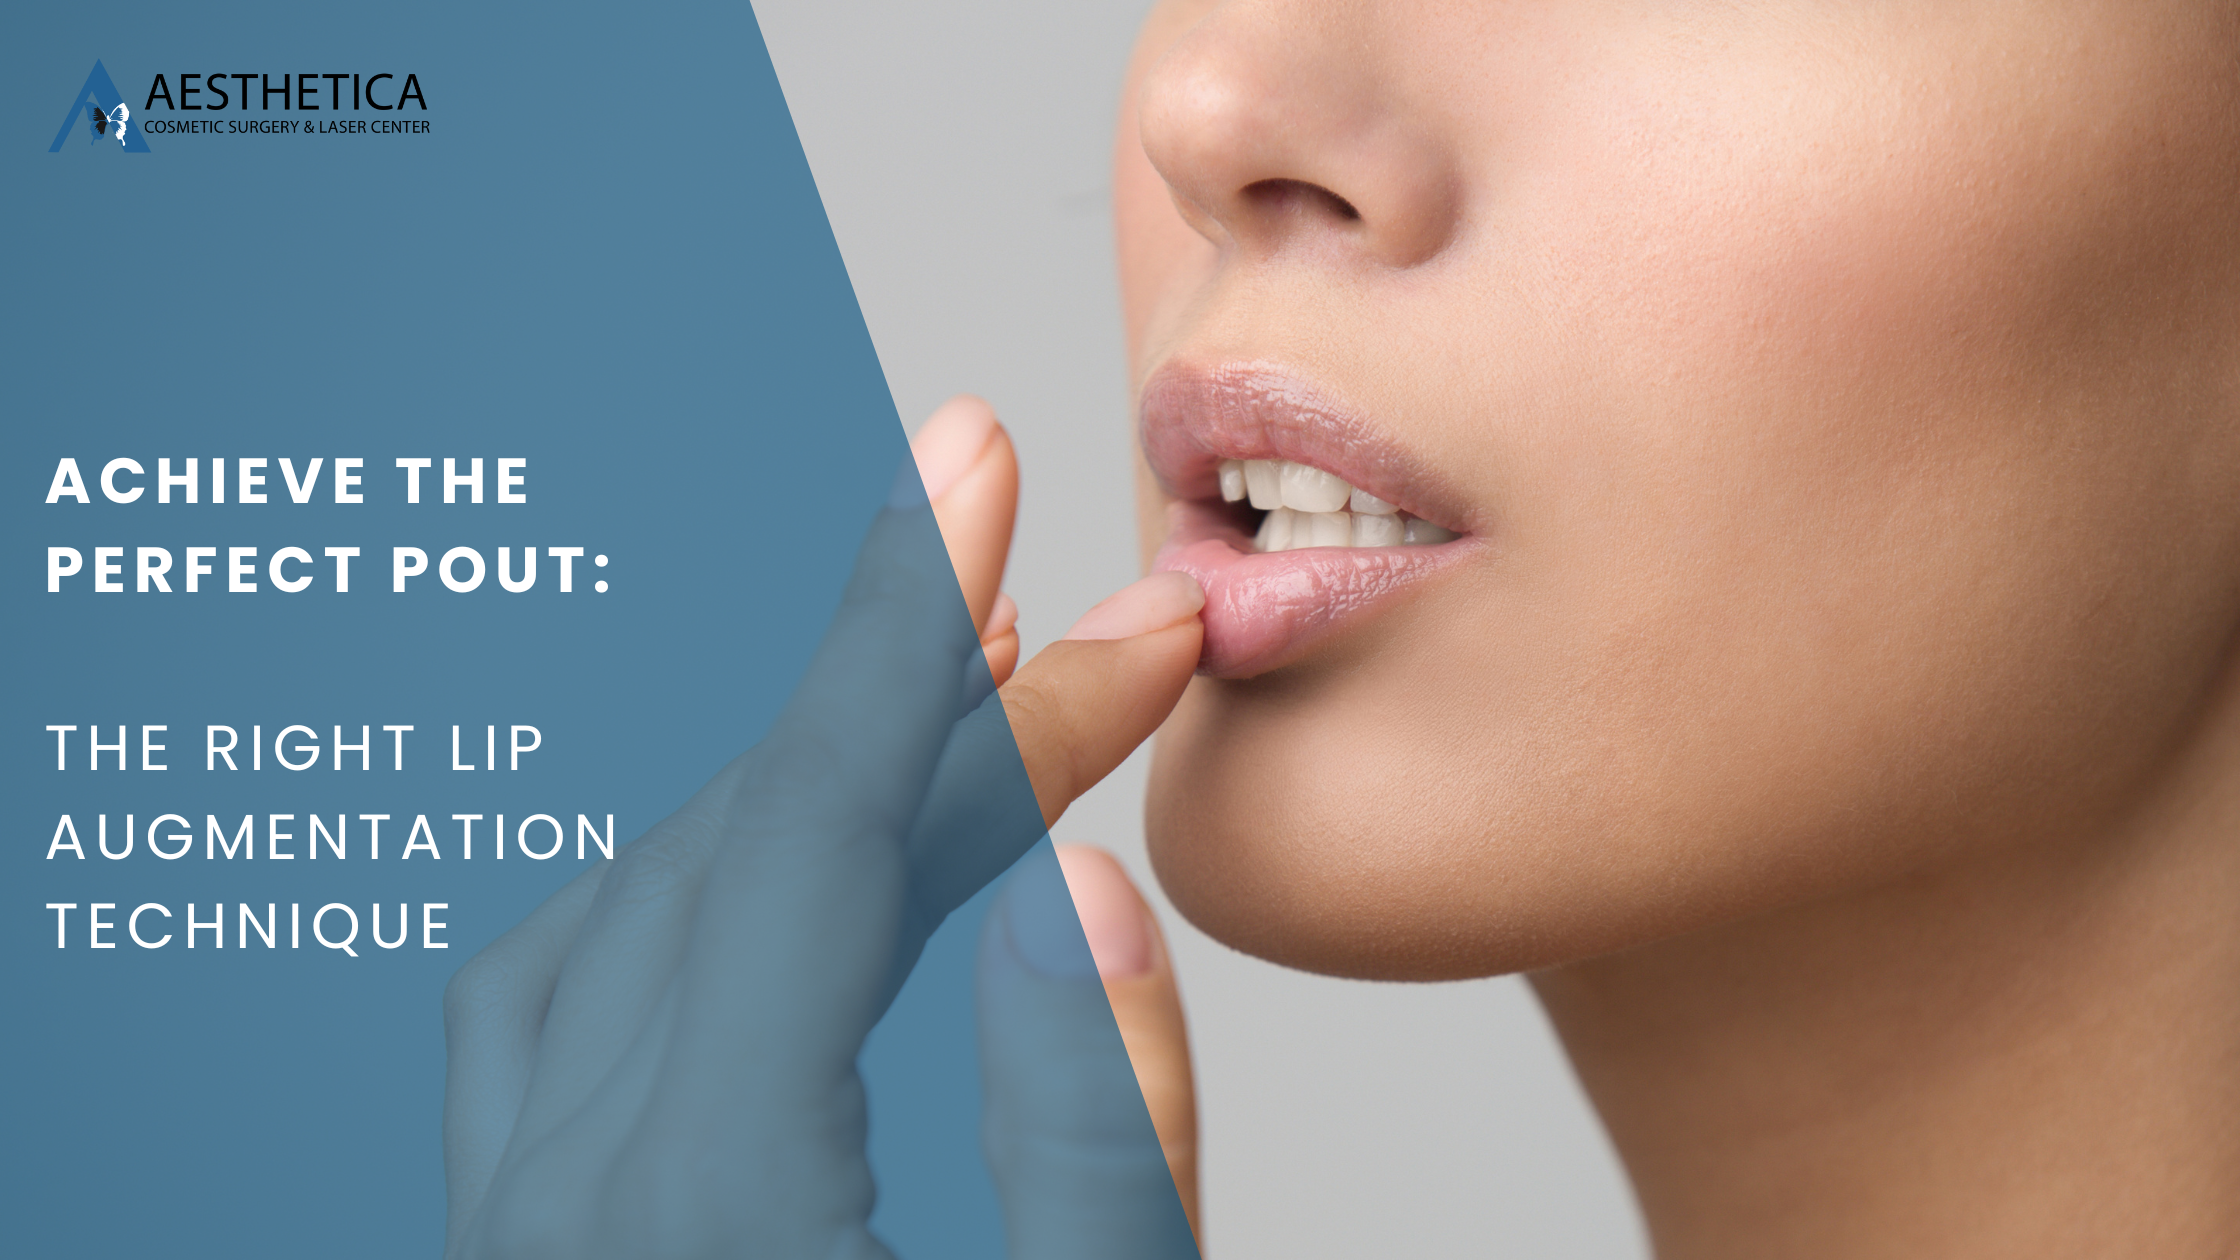 Achieve the Perfect Pout: How to Pick the Right Lip Augmentation Technique